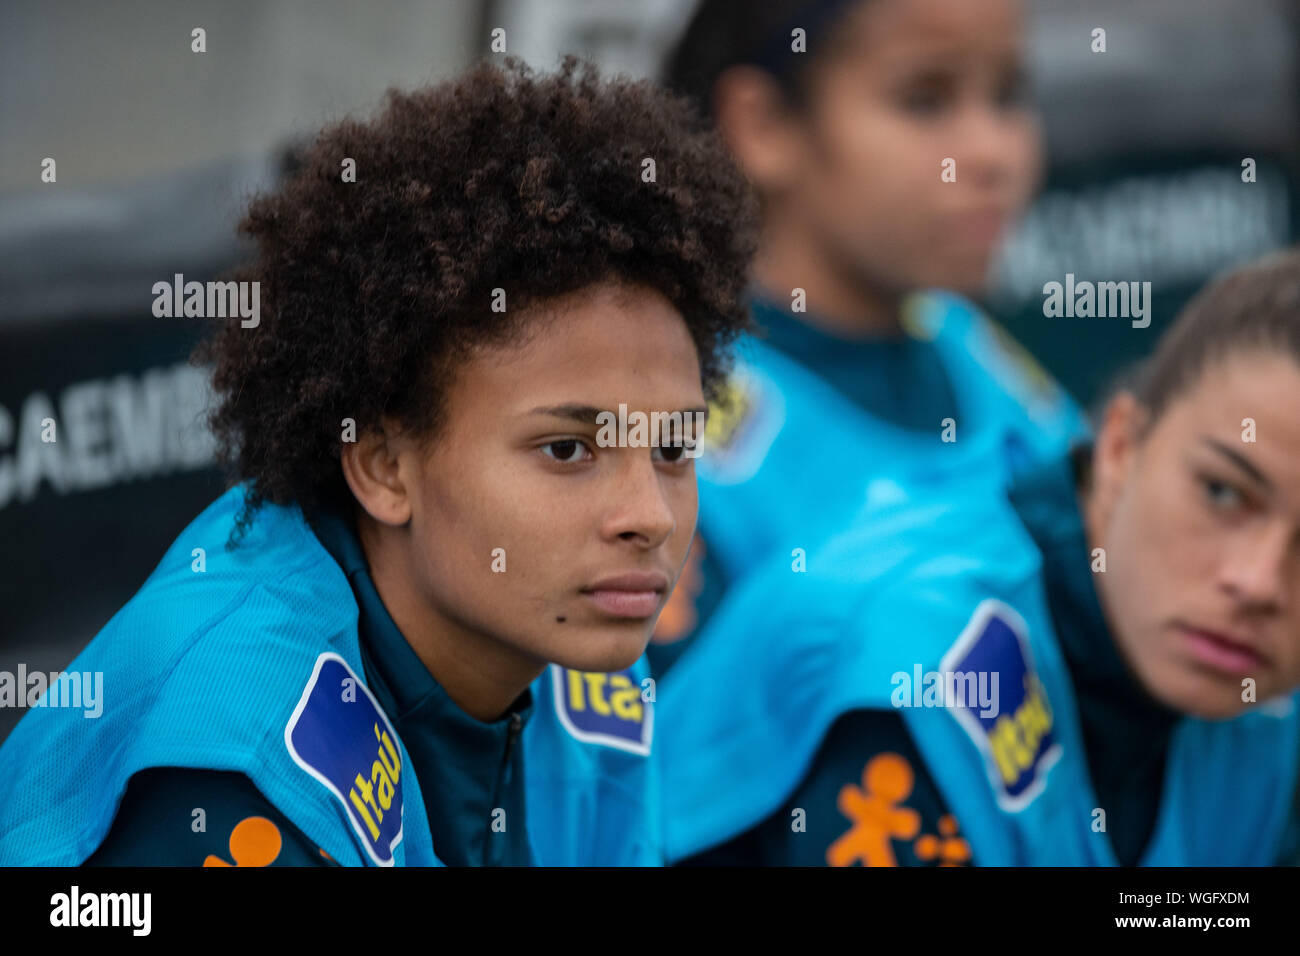 SÃO PAULO, SP - 01.09.2019: BRAZIL X CHILE - Yaya from Sao Paulo at the start of the match. Uber Women'scer Cup Cup - Brazil and Chile women's soccea teams will play in the finf the tournament on Sunday aay afternoon, September 1, 2019, at Paca Stadium, in, in São Paulo. (Photo: Van Campos/Fotoarena) Stock Photo